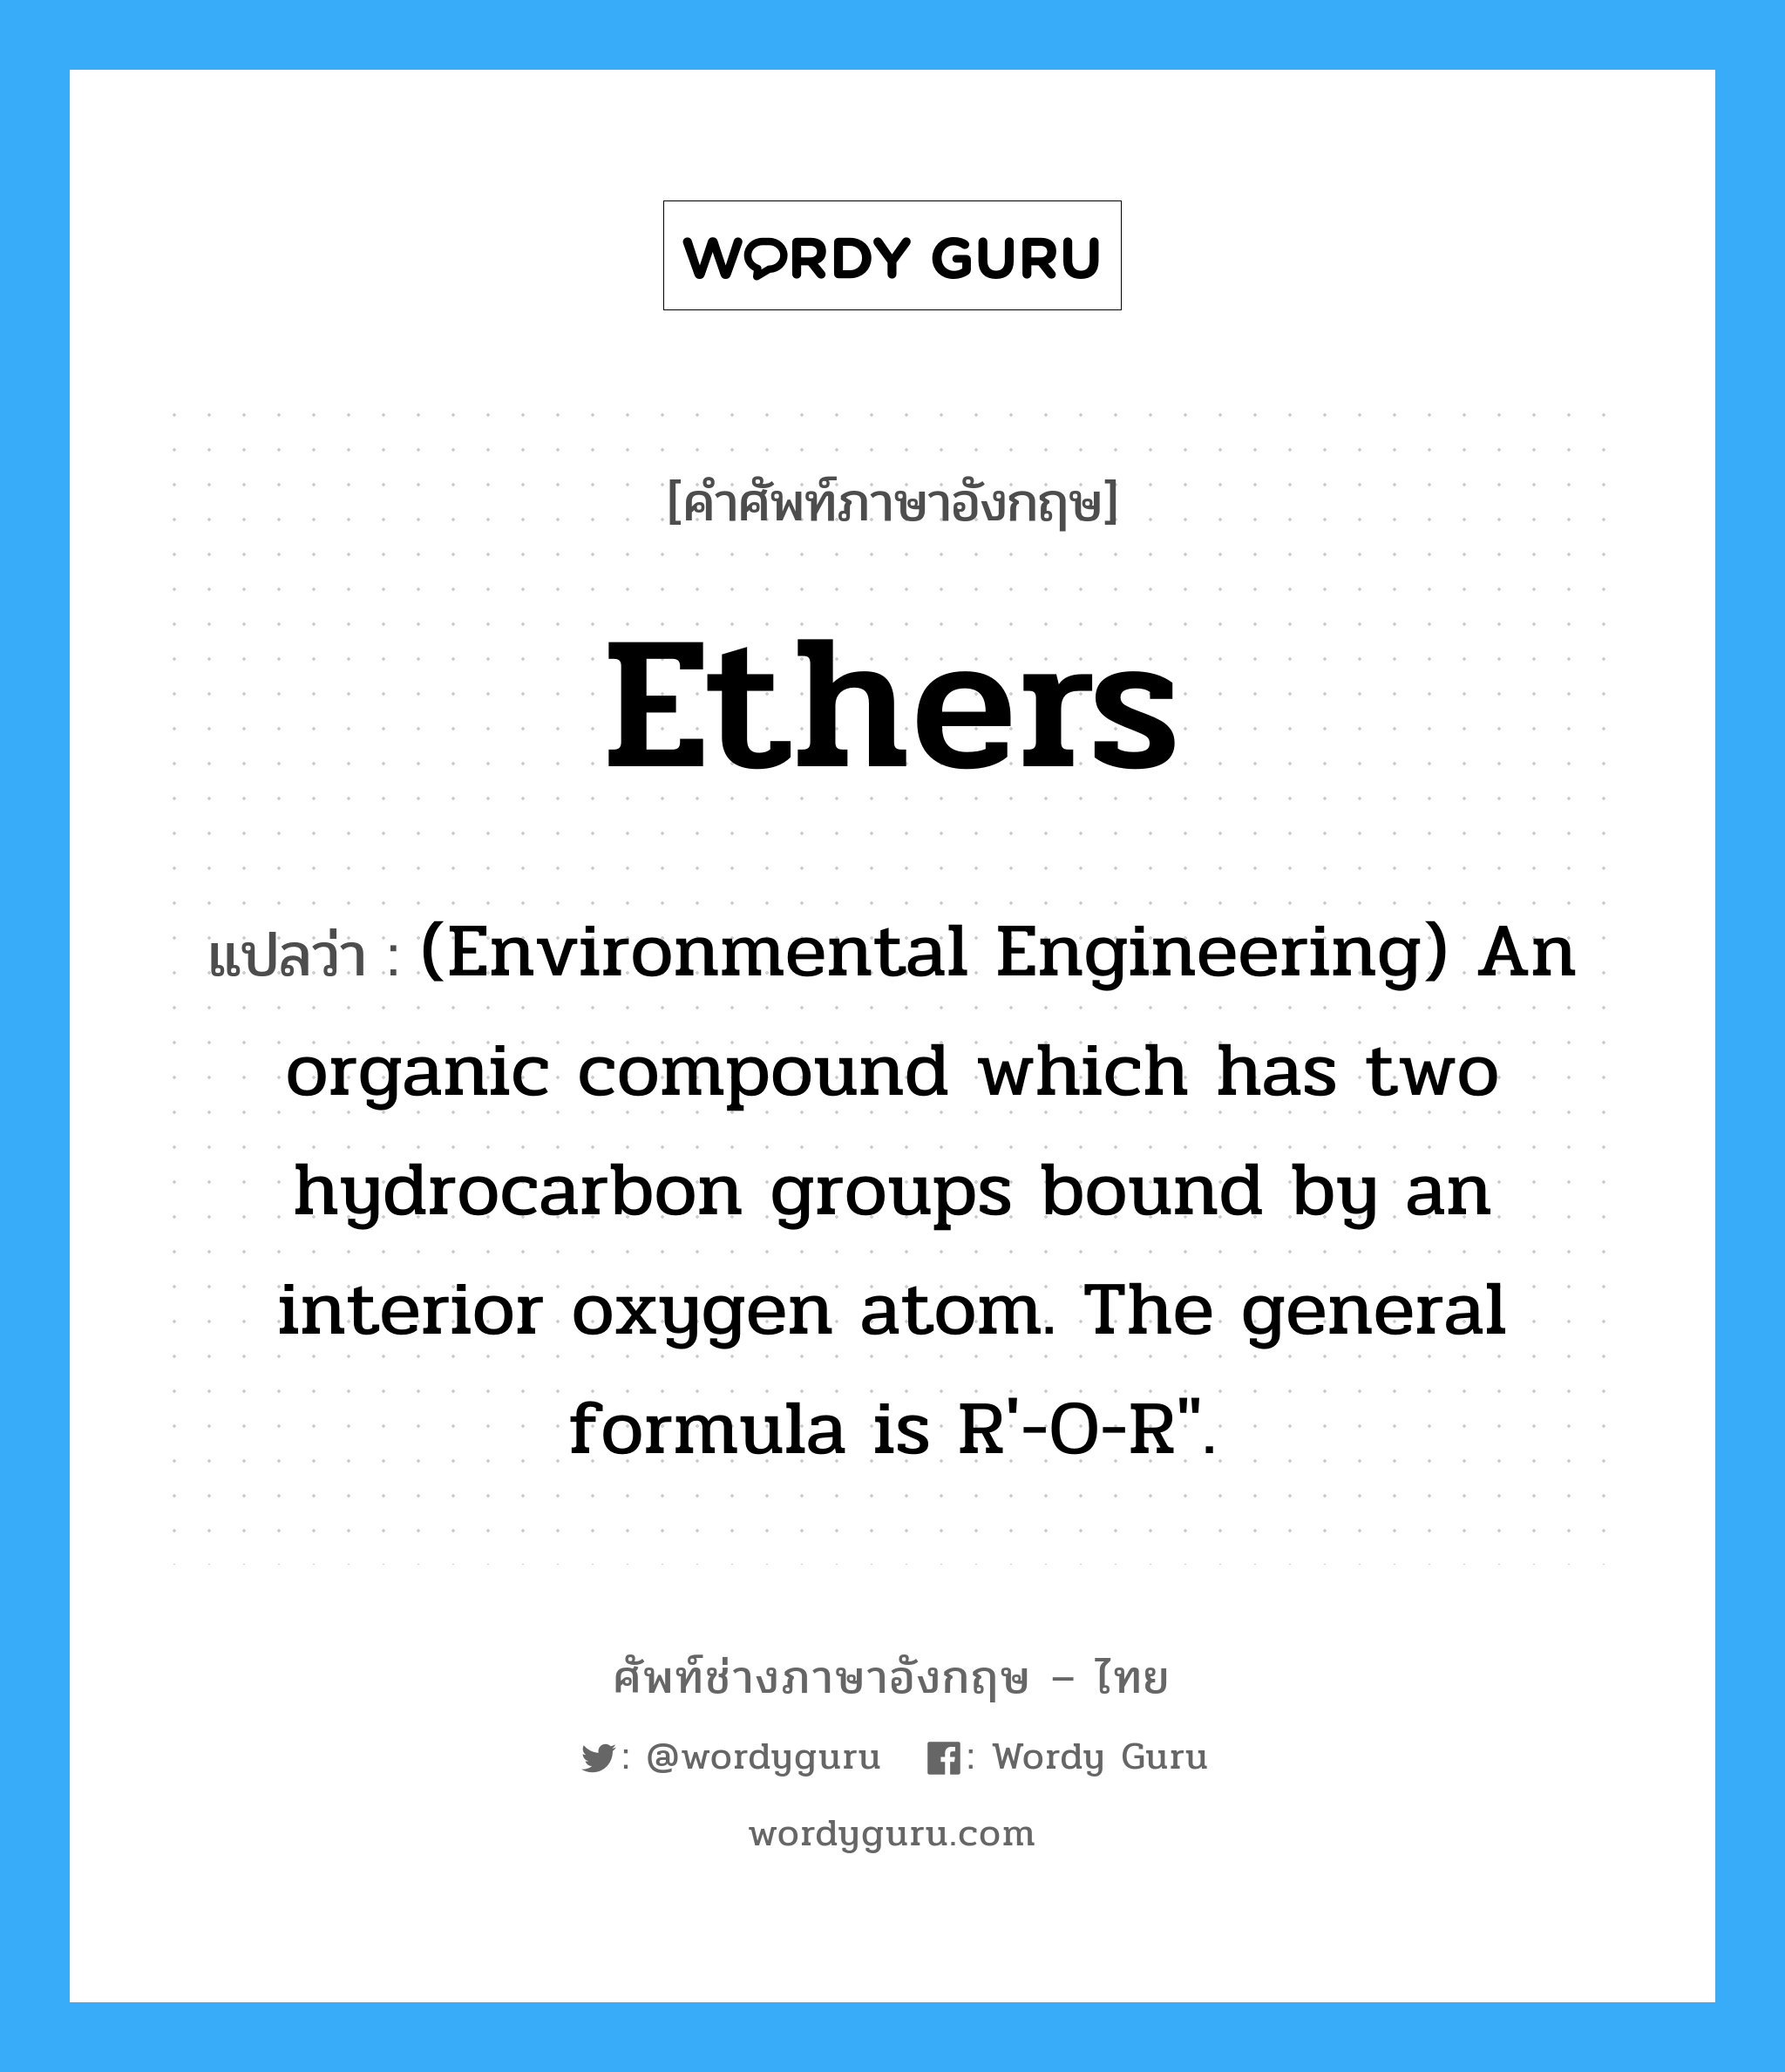 Ethers แปลว่า?, คำศัพท์ช่างภาษาอังกฤษ - ไทย Ethers คำศัพท์ภาษาอังกฤษ Ethers แปลว่า (Environmental Engineering) An organic compound which has two hydrocarbon groups bound by an interior oxygen atom. The general formula is R'-O-R".